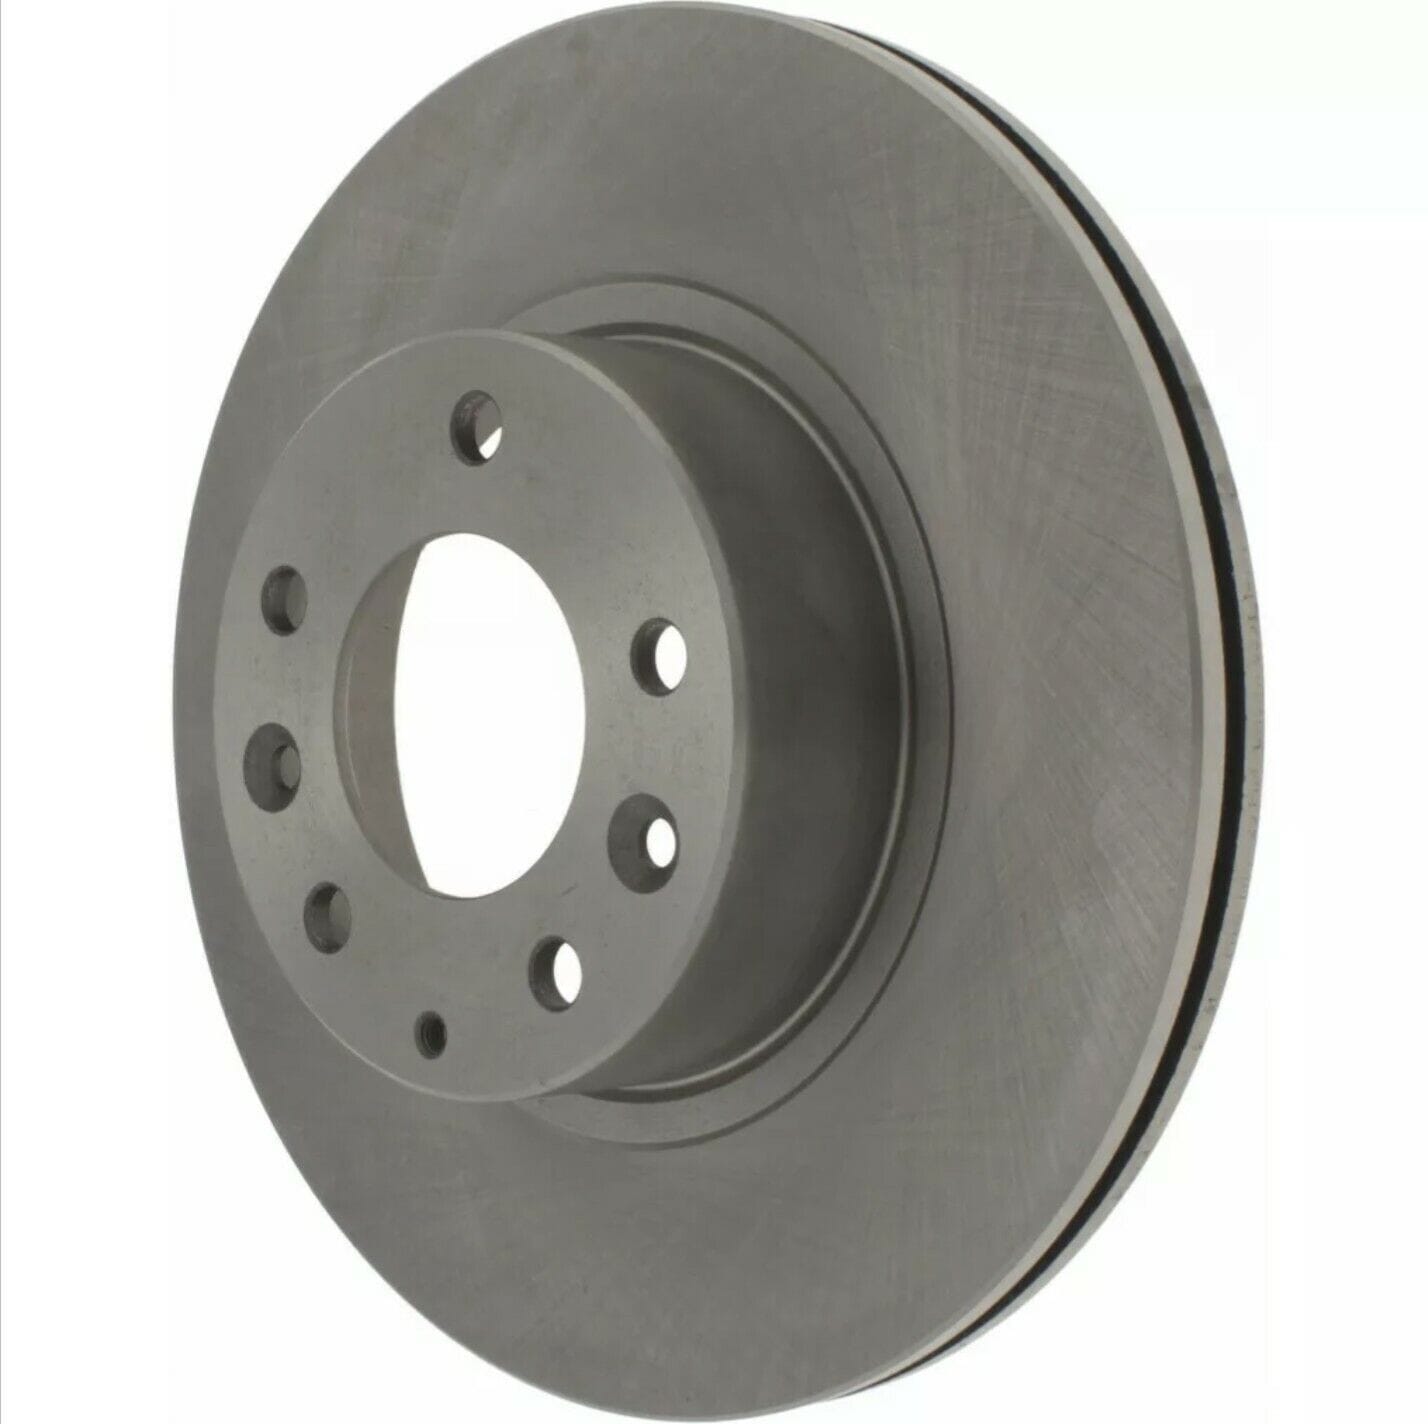 Brakes - FD Stoptech / Centric Front Rotors - New - 1993 to 2002 Mazda RX-7 - Minneapolis, MN 55409, United States